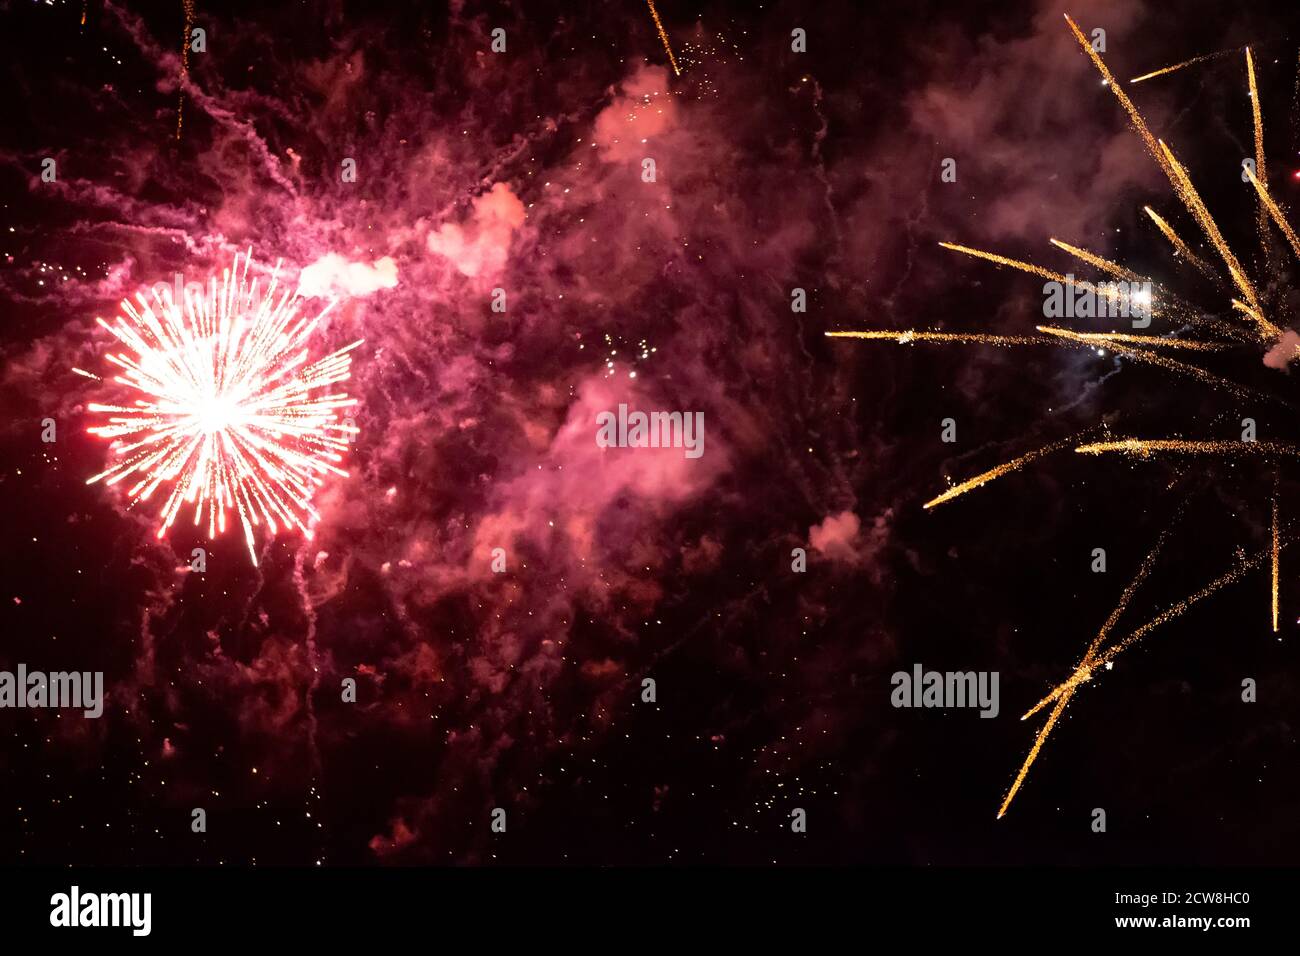 Gold rays of fireworks in red smoke on a black background. Festive background. Stock Photo